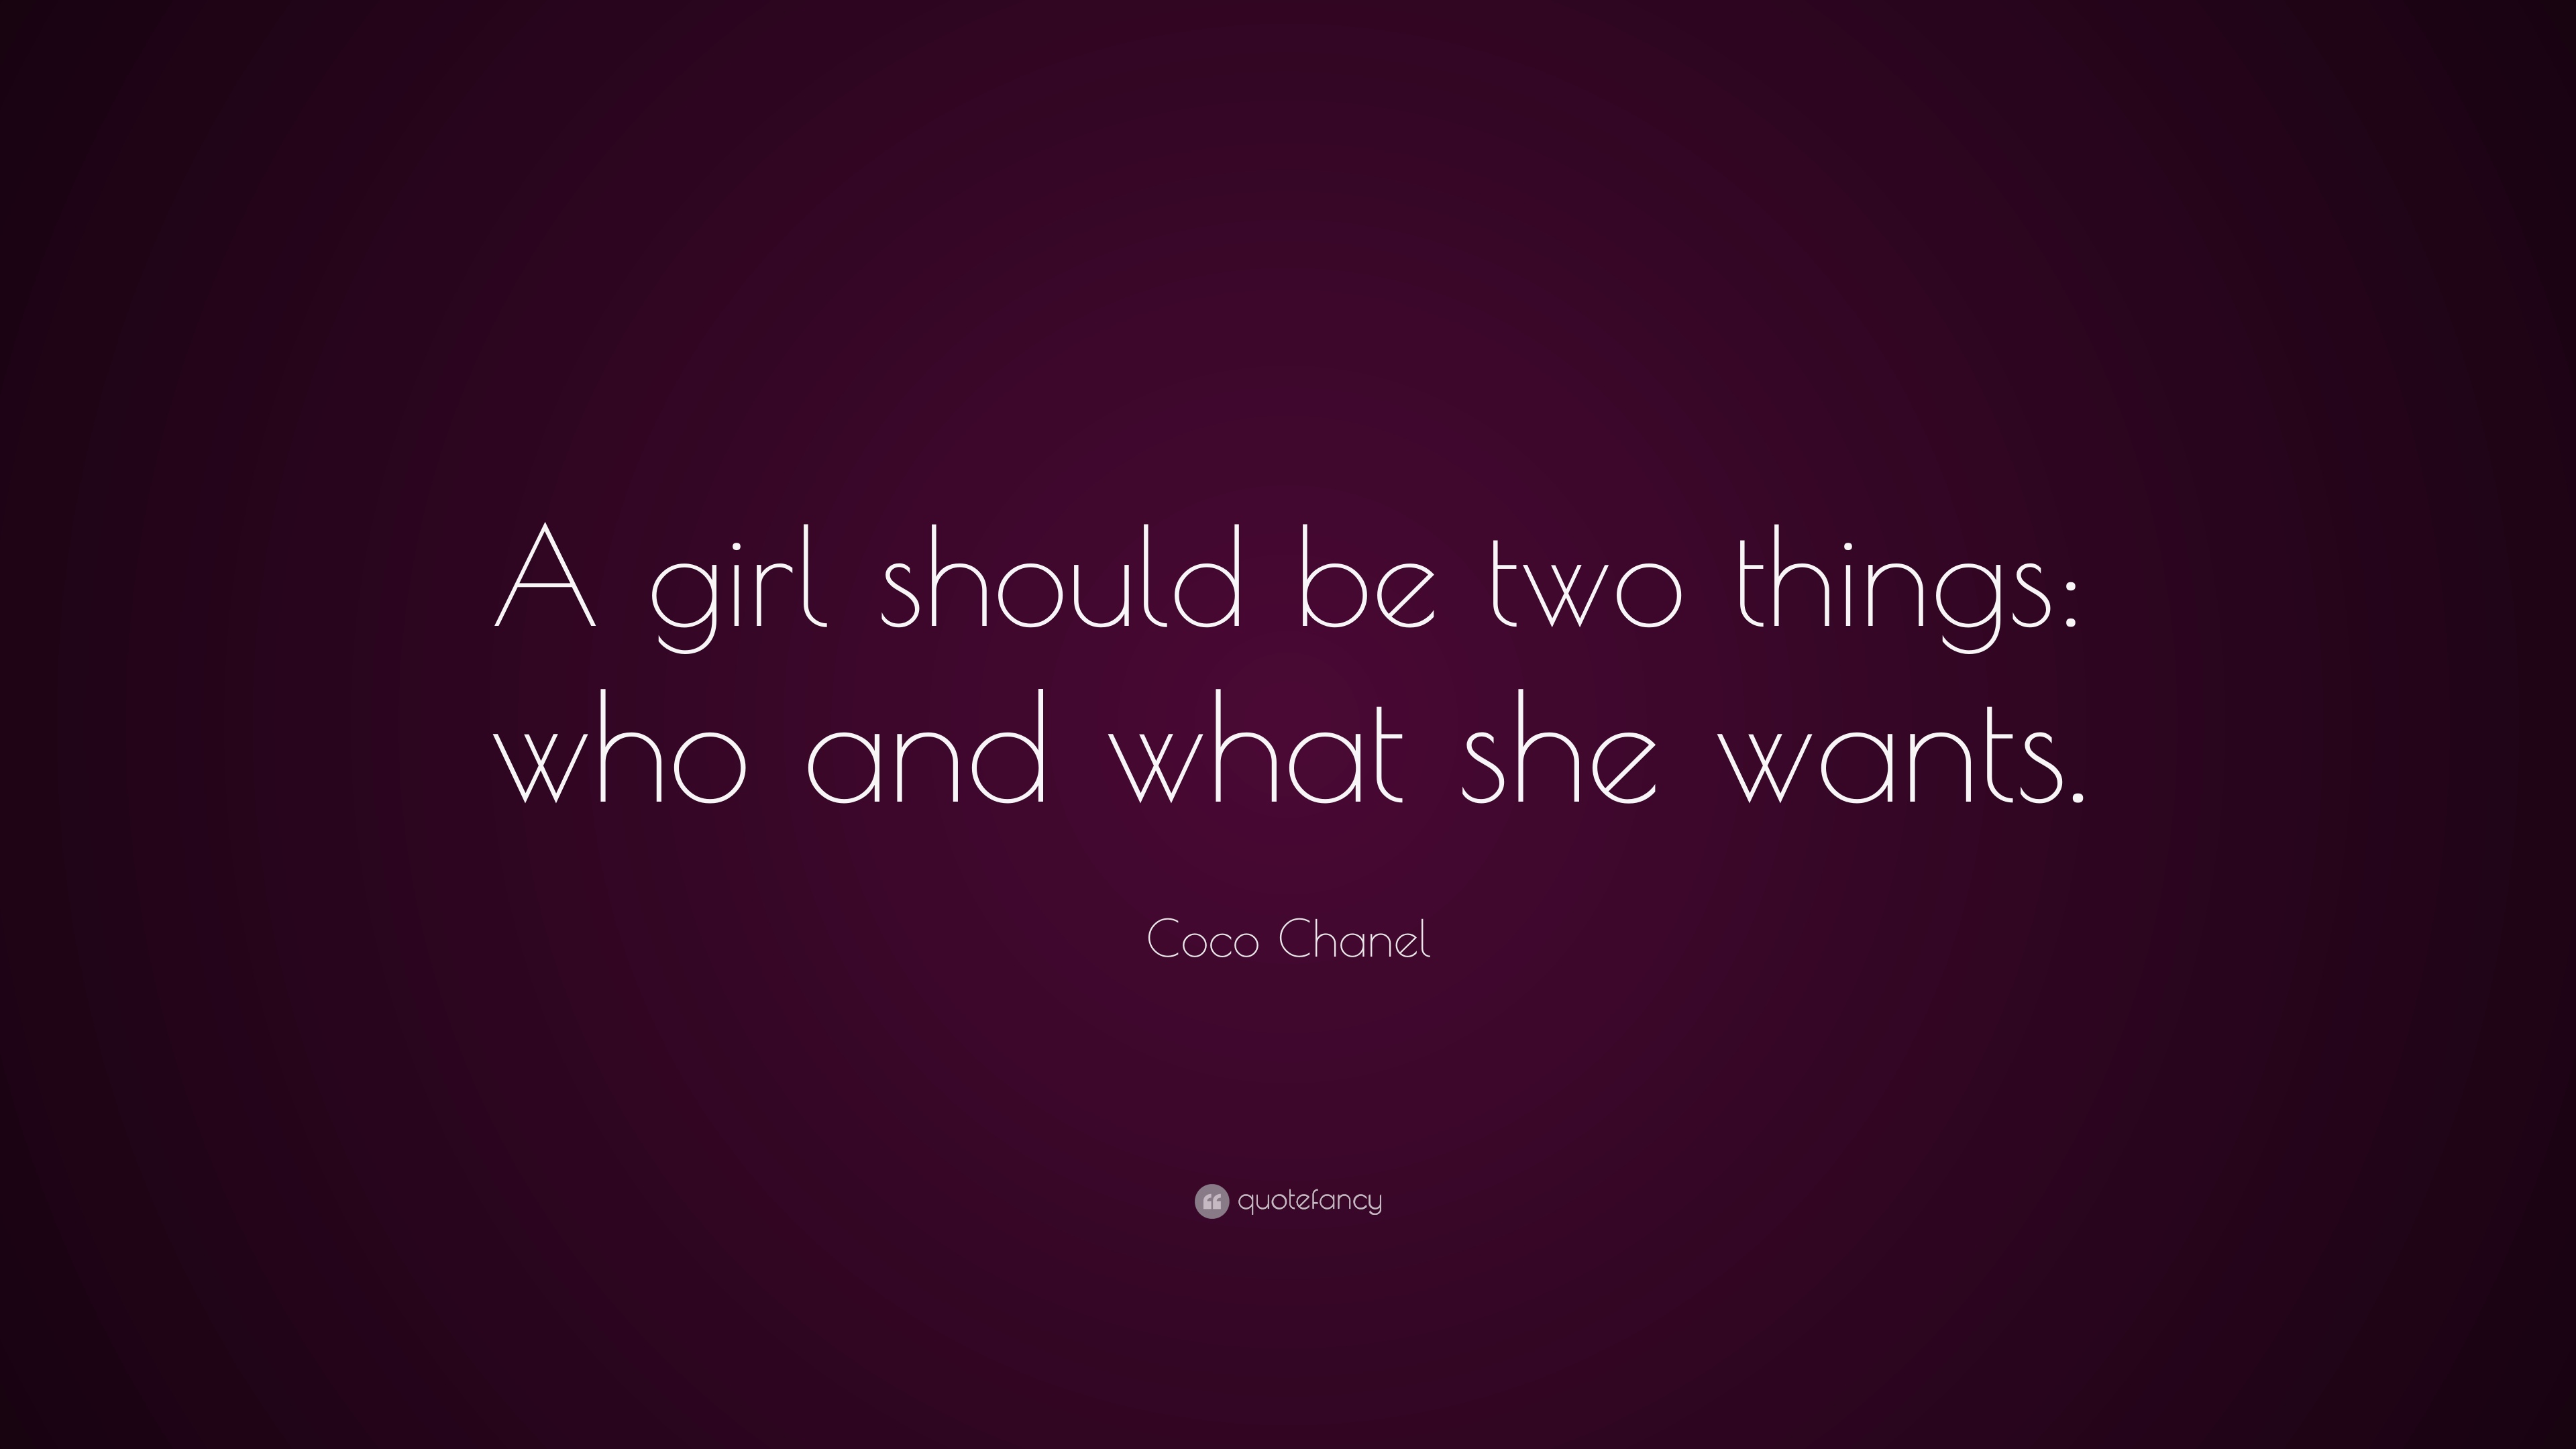 Coco Chanel Quotes Wallpapers